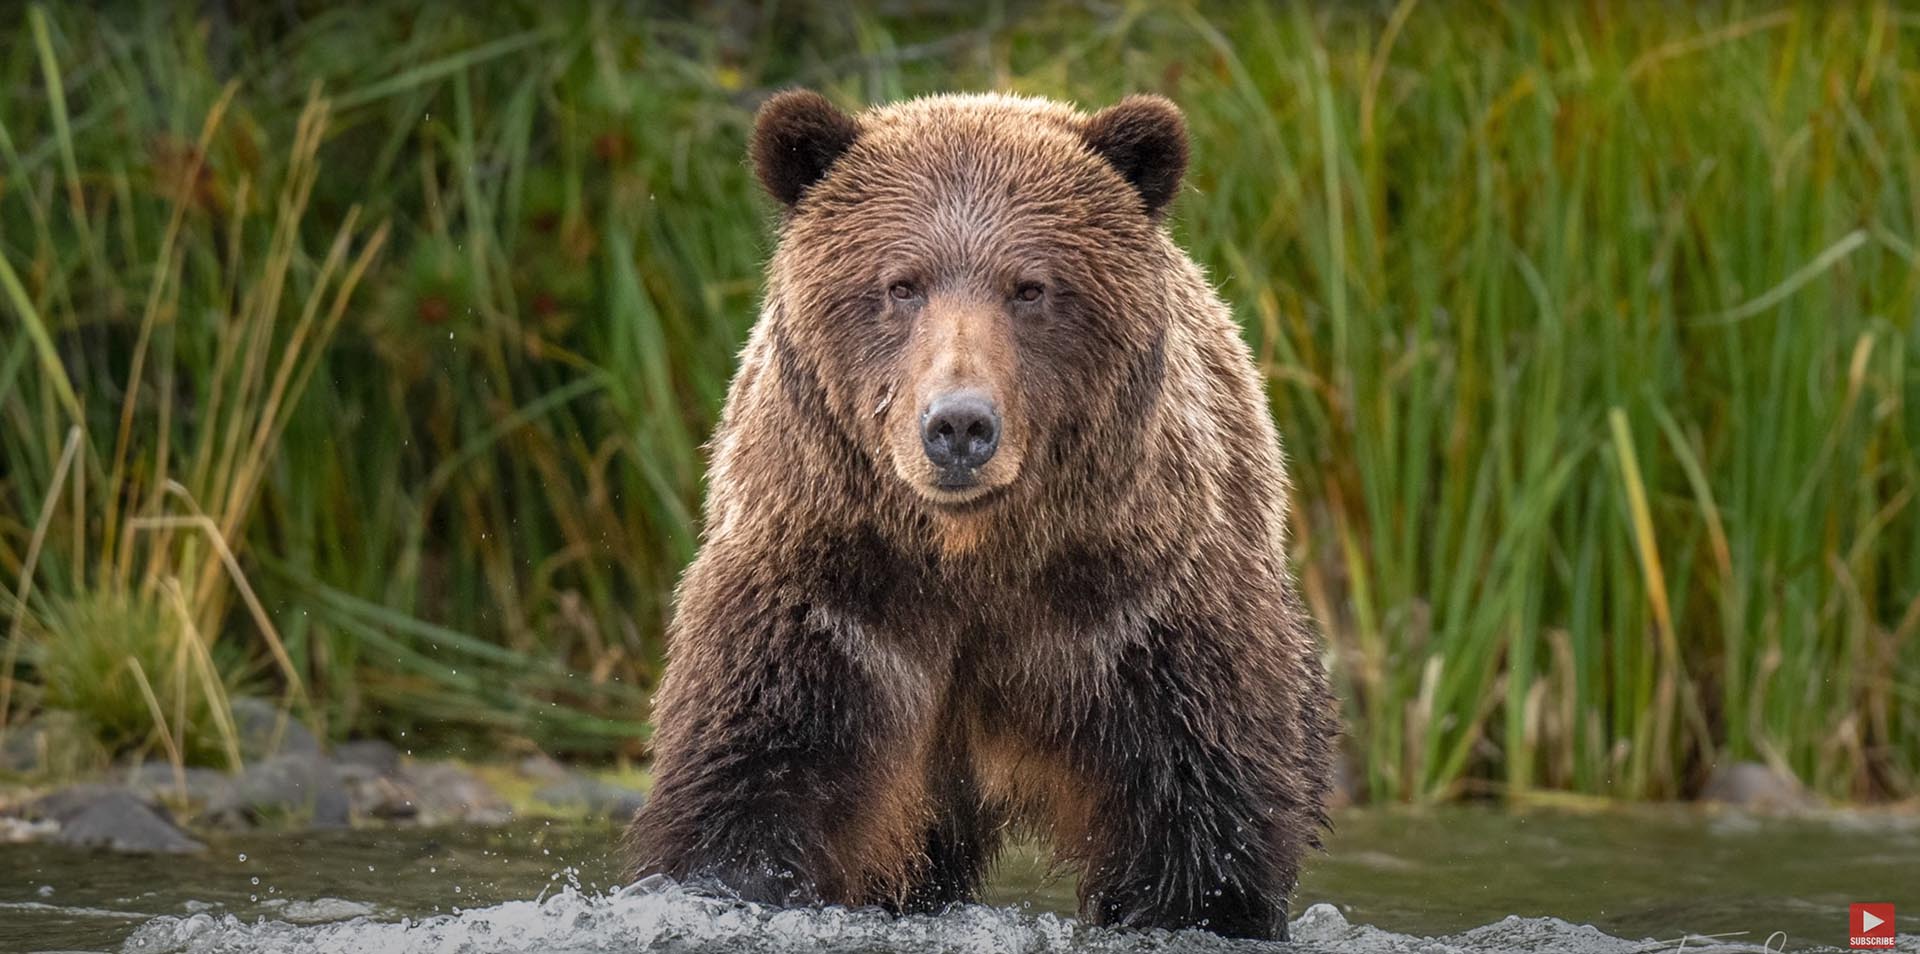 How I photographed this charging grizzly bear | Photography Academy